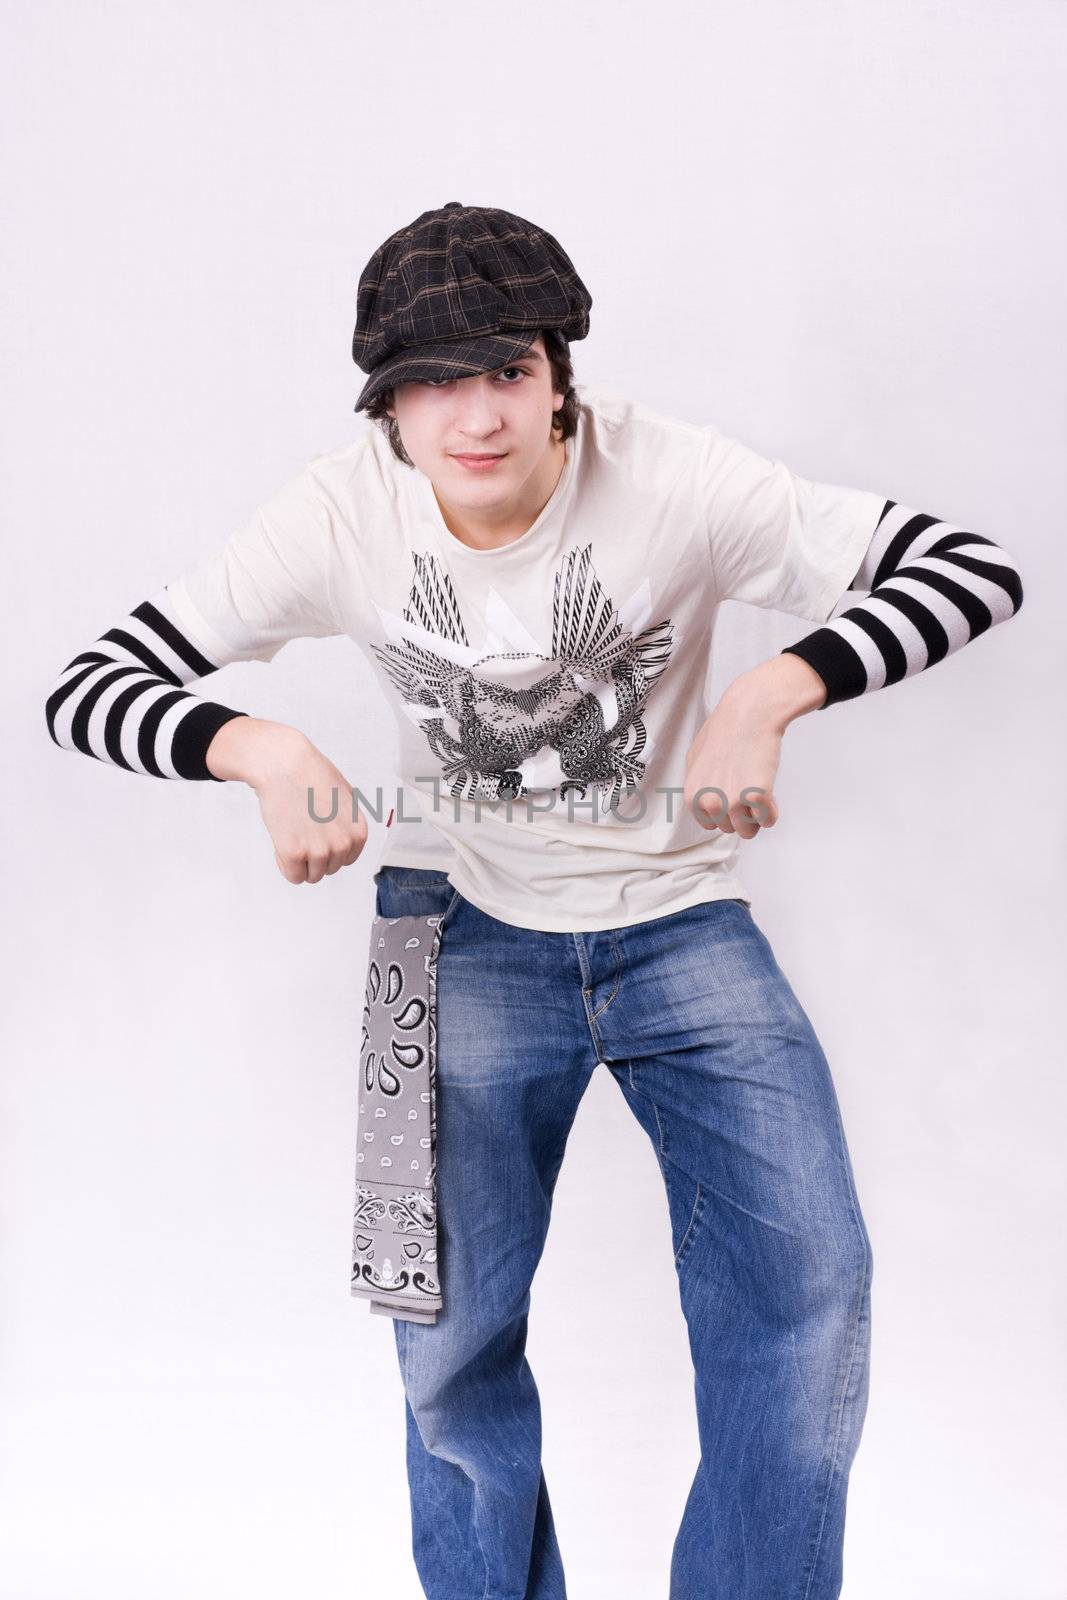 Teenage boy dancing Locking or Hip-hop dance over isolated background